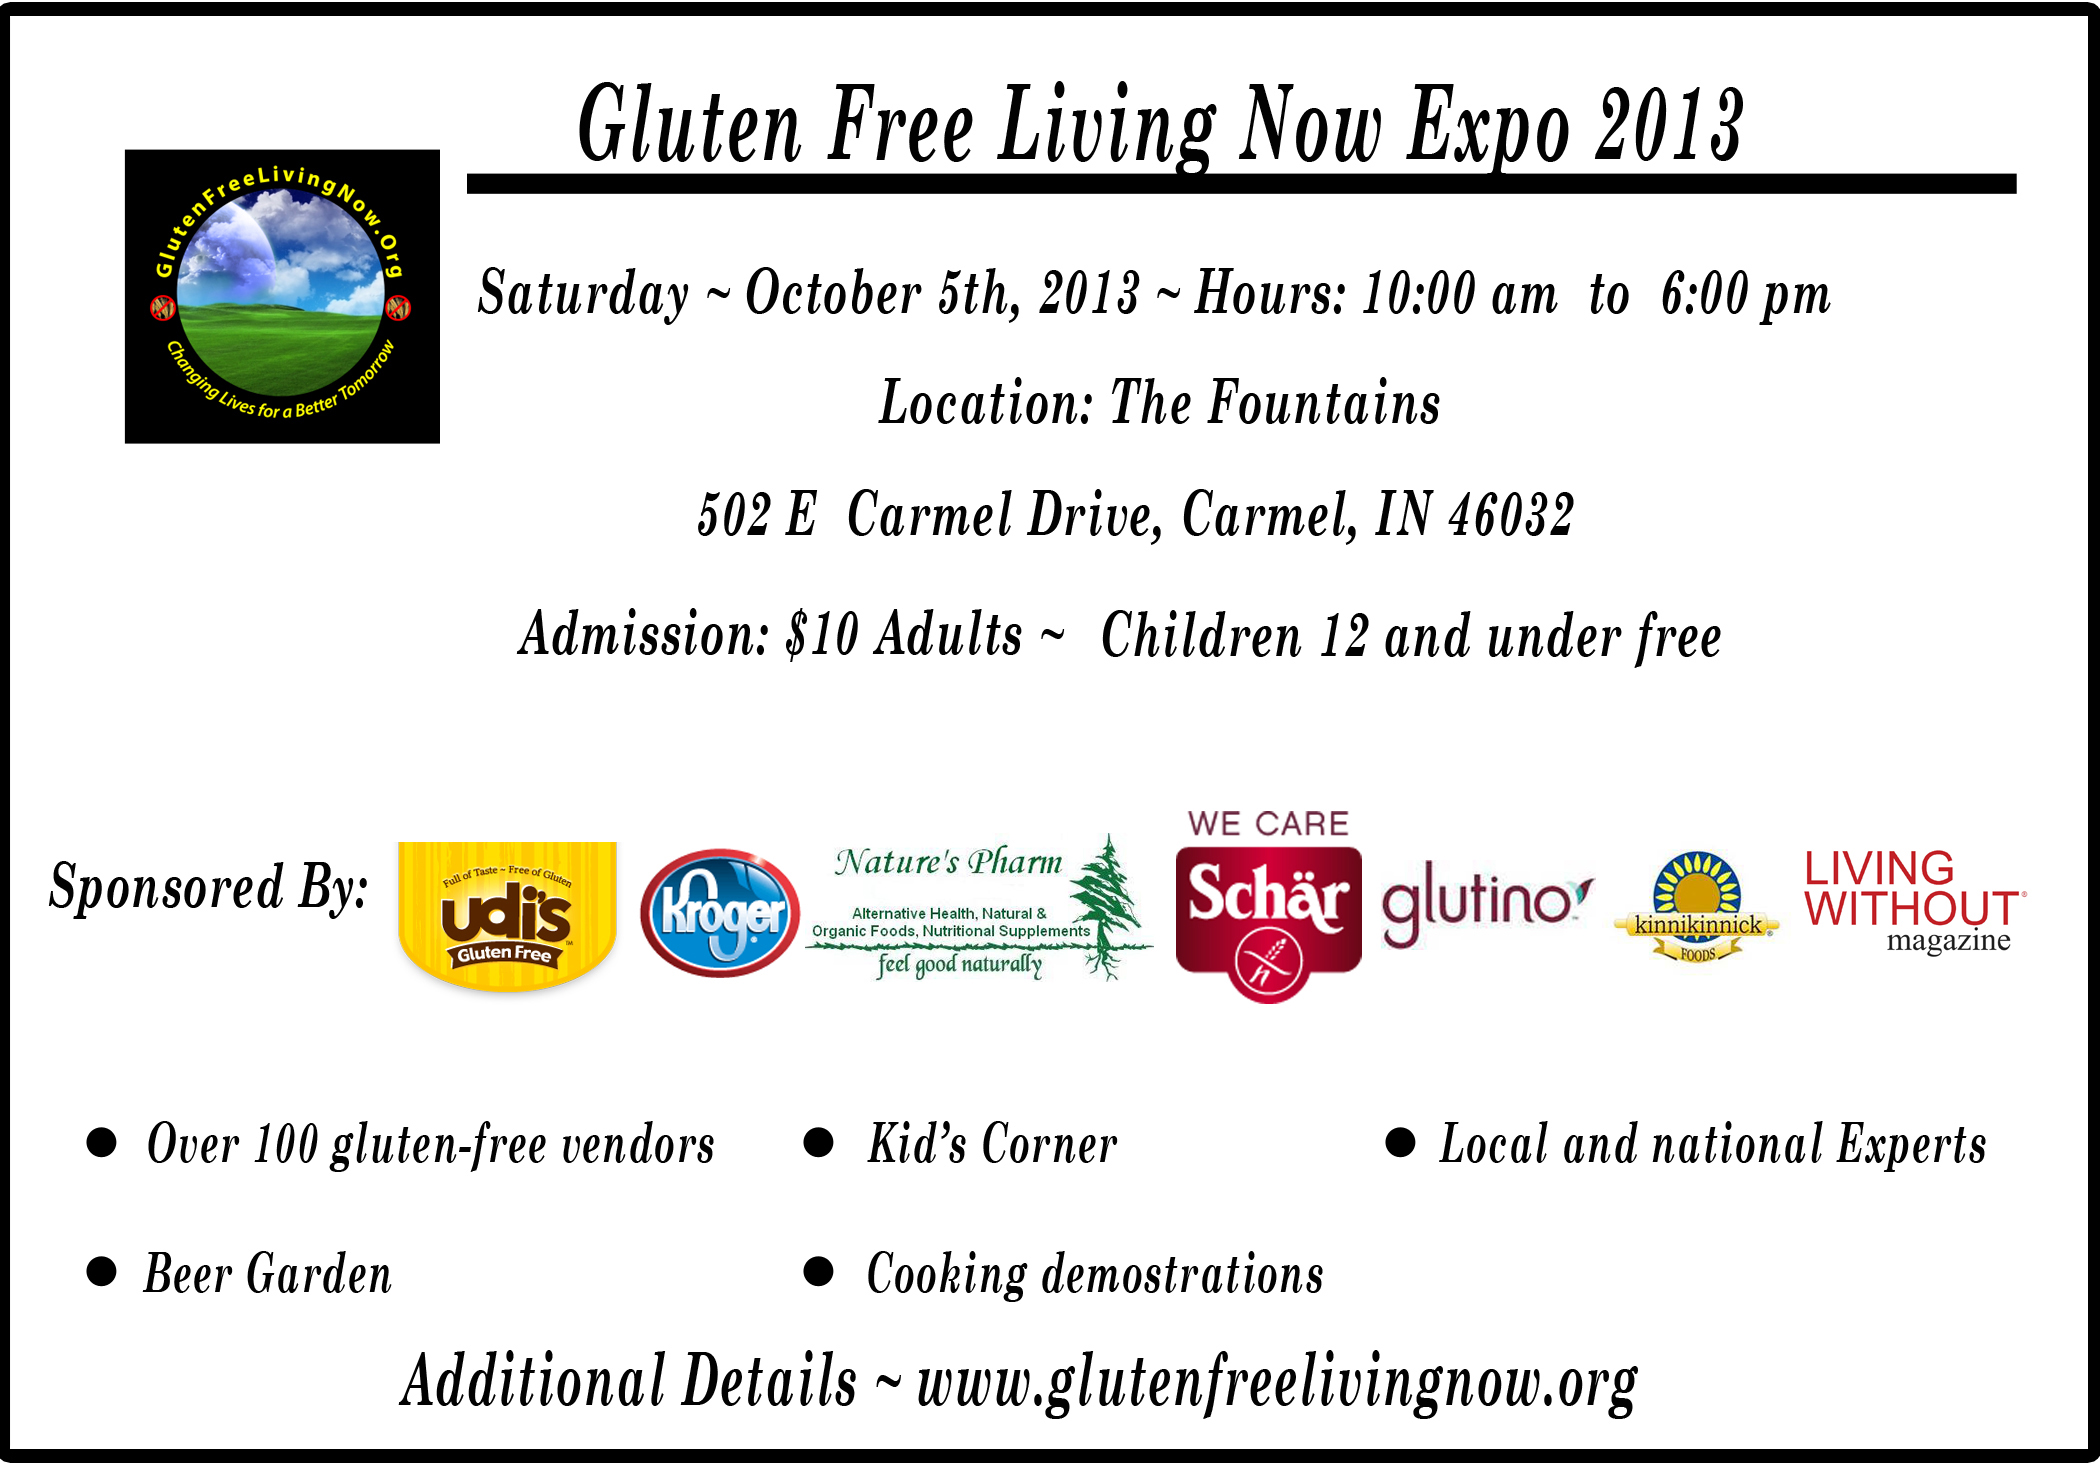 Gluten Free Living Now Expo October 5th in Indiana